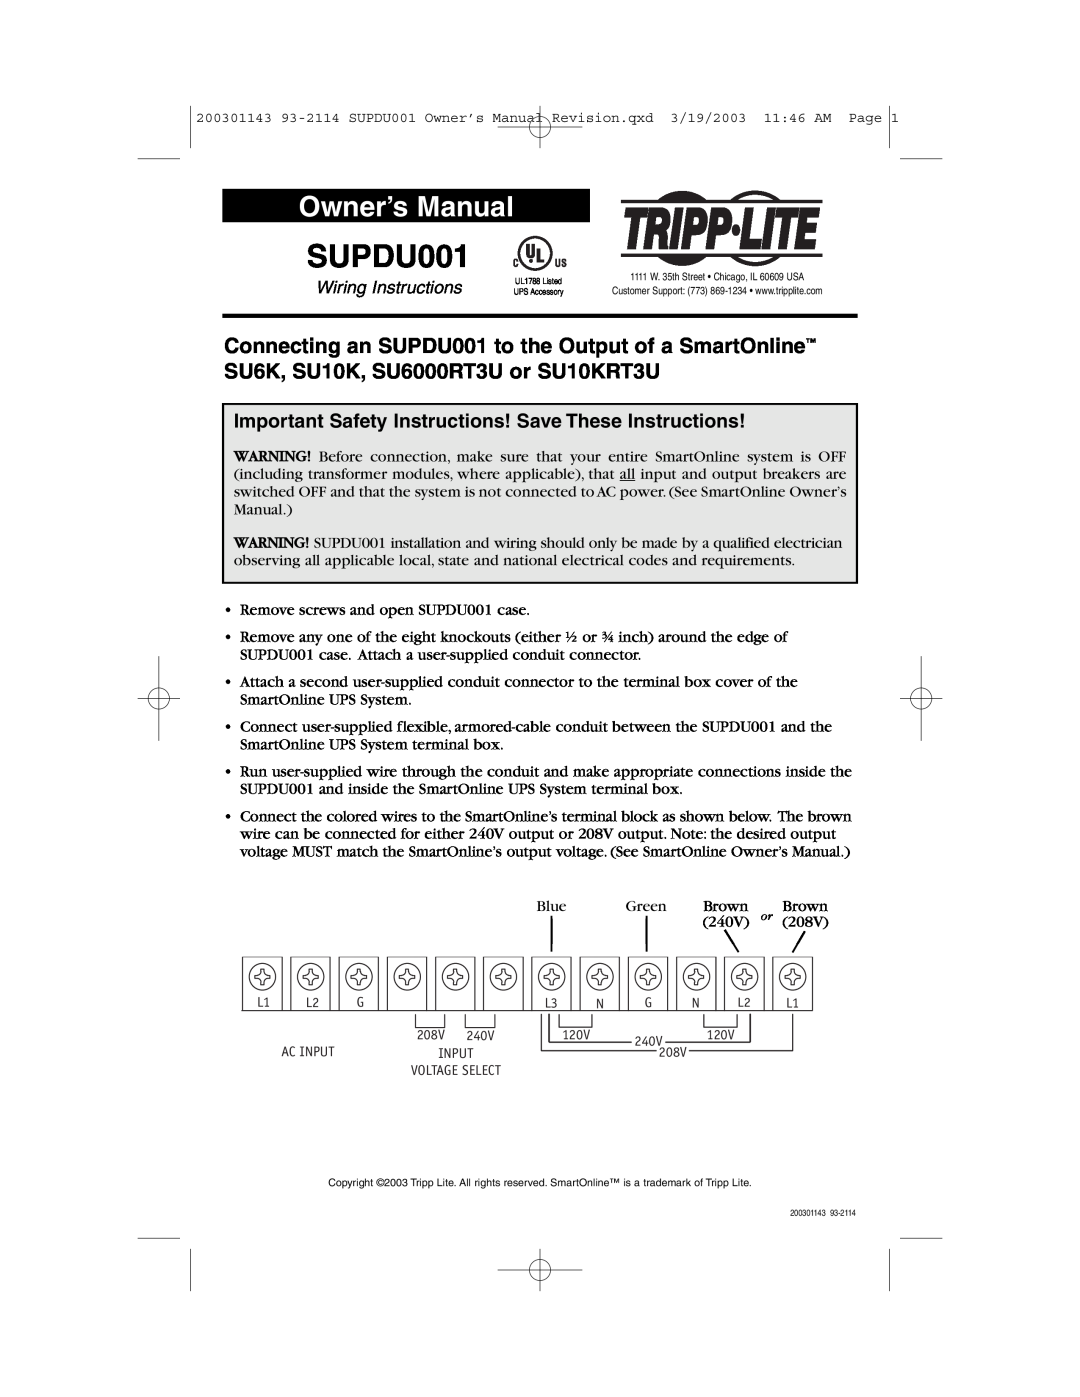 Tripp Lite owner manual SUPDU001 C UL US, Owner’s Manual, Important Safety Instructions! Save These Instructions 